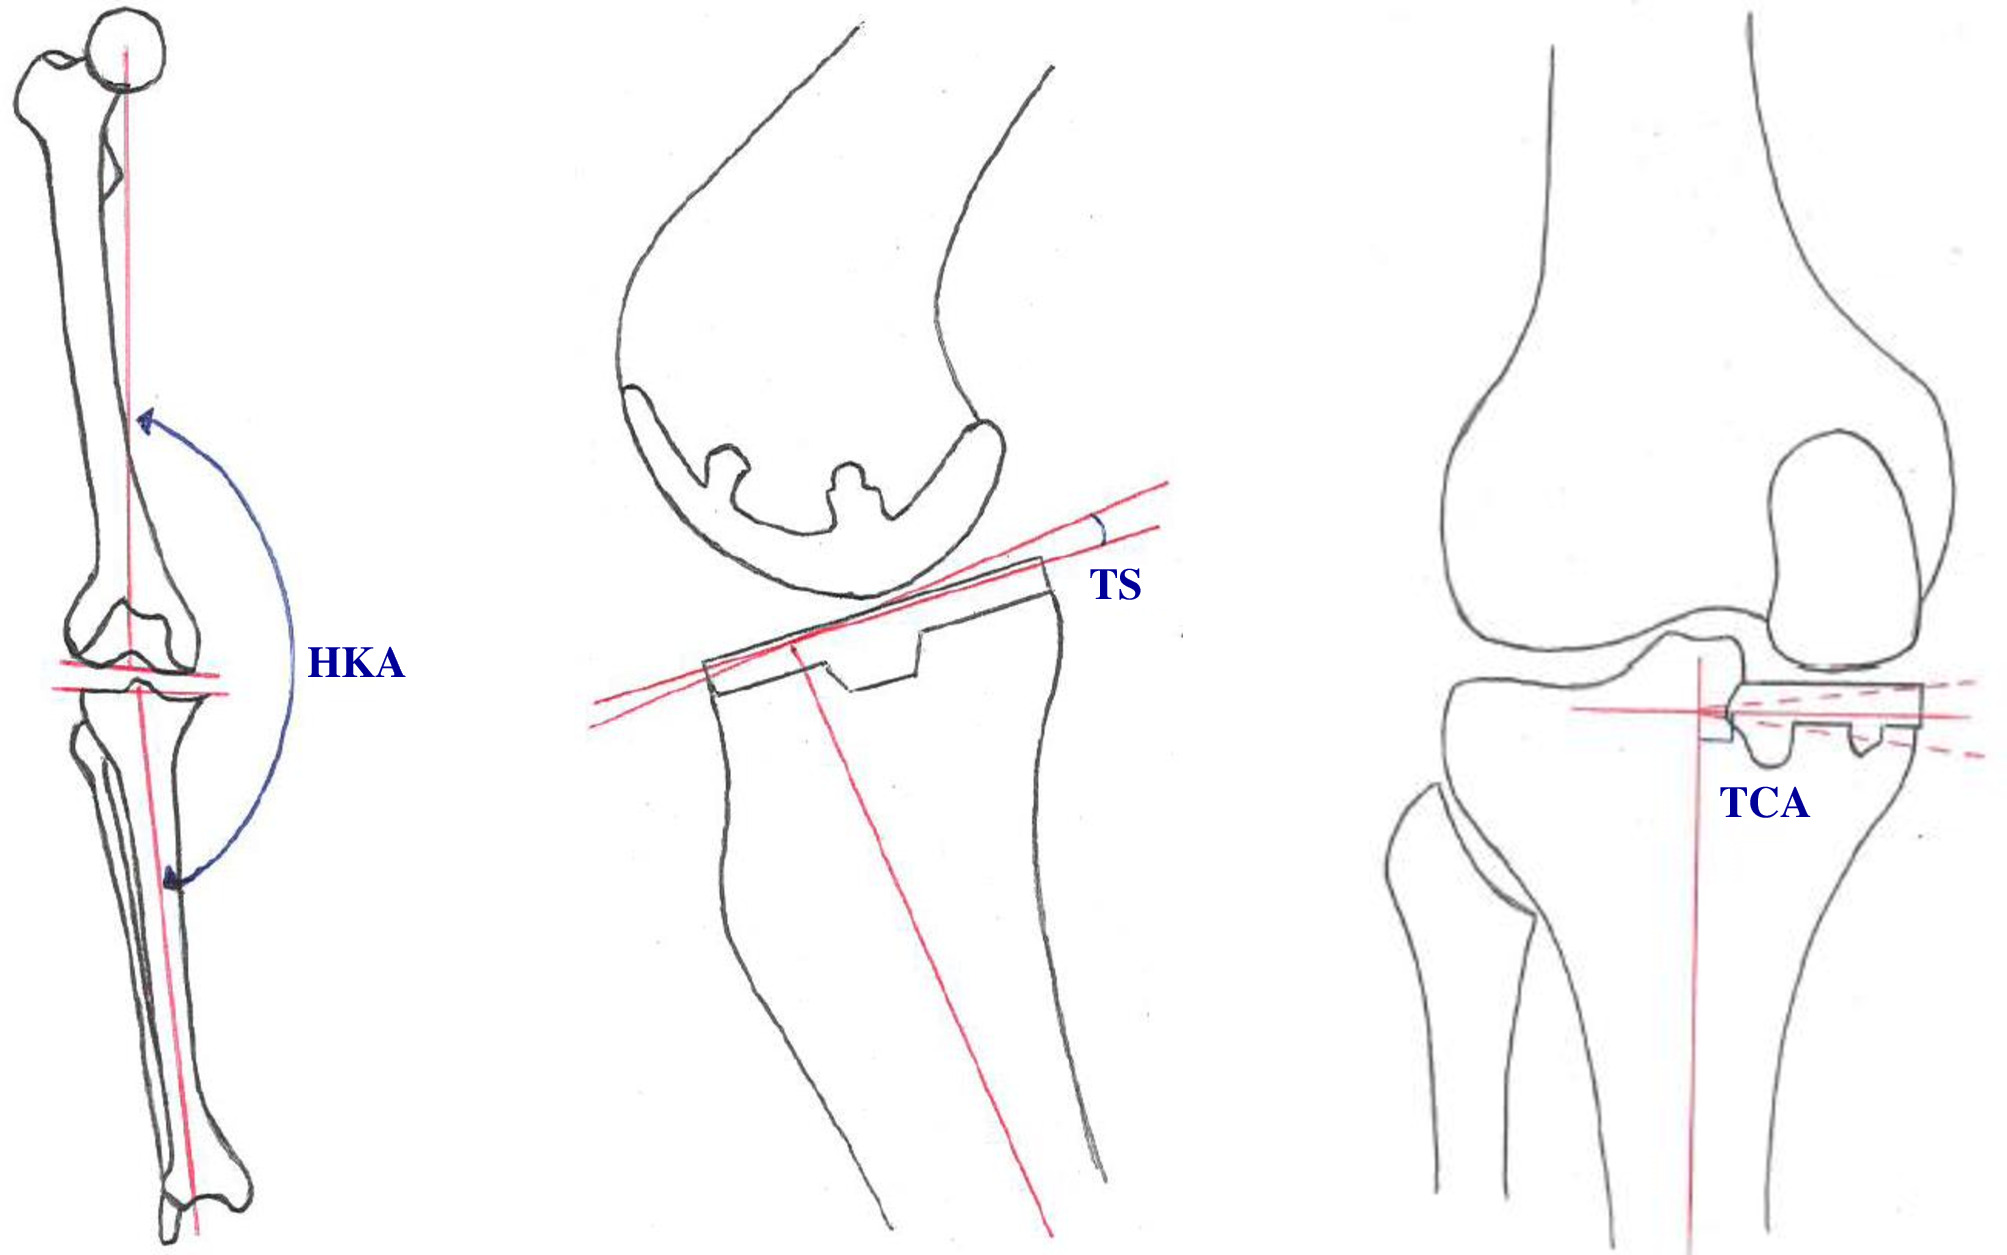 Fig. 2 
            Illustration of radiological outcomes: hip-knee-ankle angle (HKA; left), tibial slope (TS; centre), and tibial coronal alignment angle (TCA; right).
          